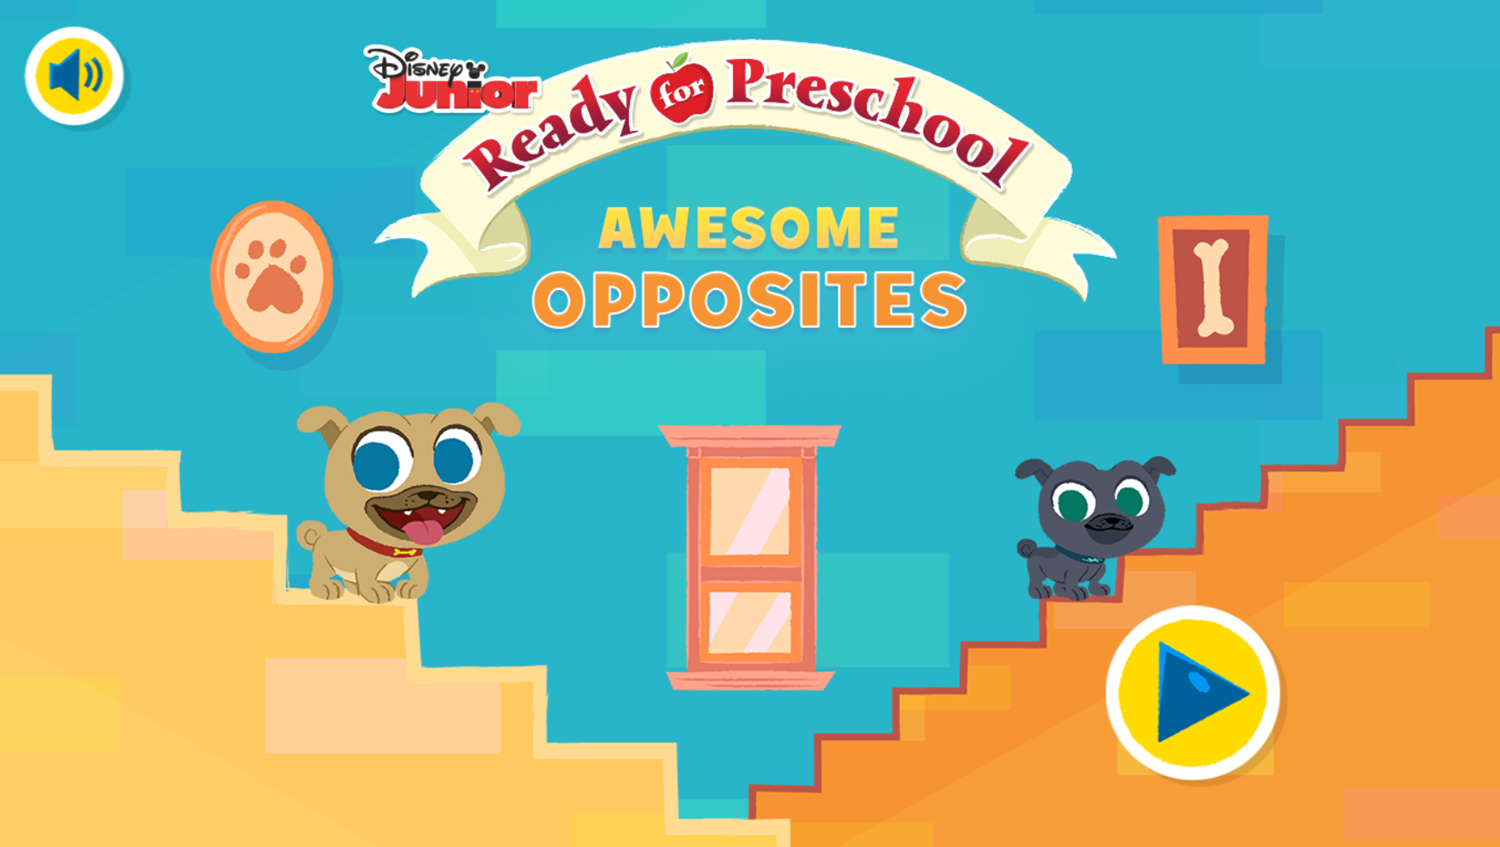 Disney Jr Bingo and Rolly Awesome Opposites Game Welcome Screen Screenshot.